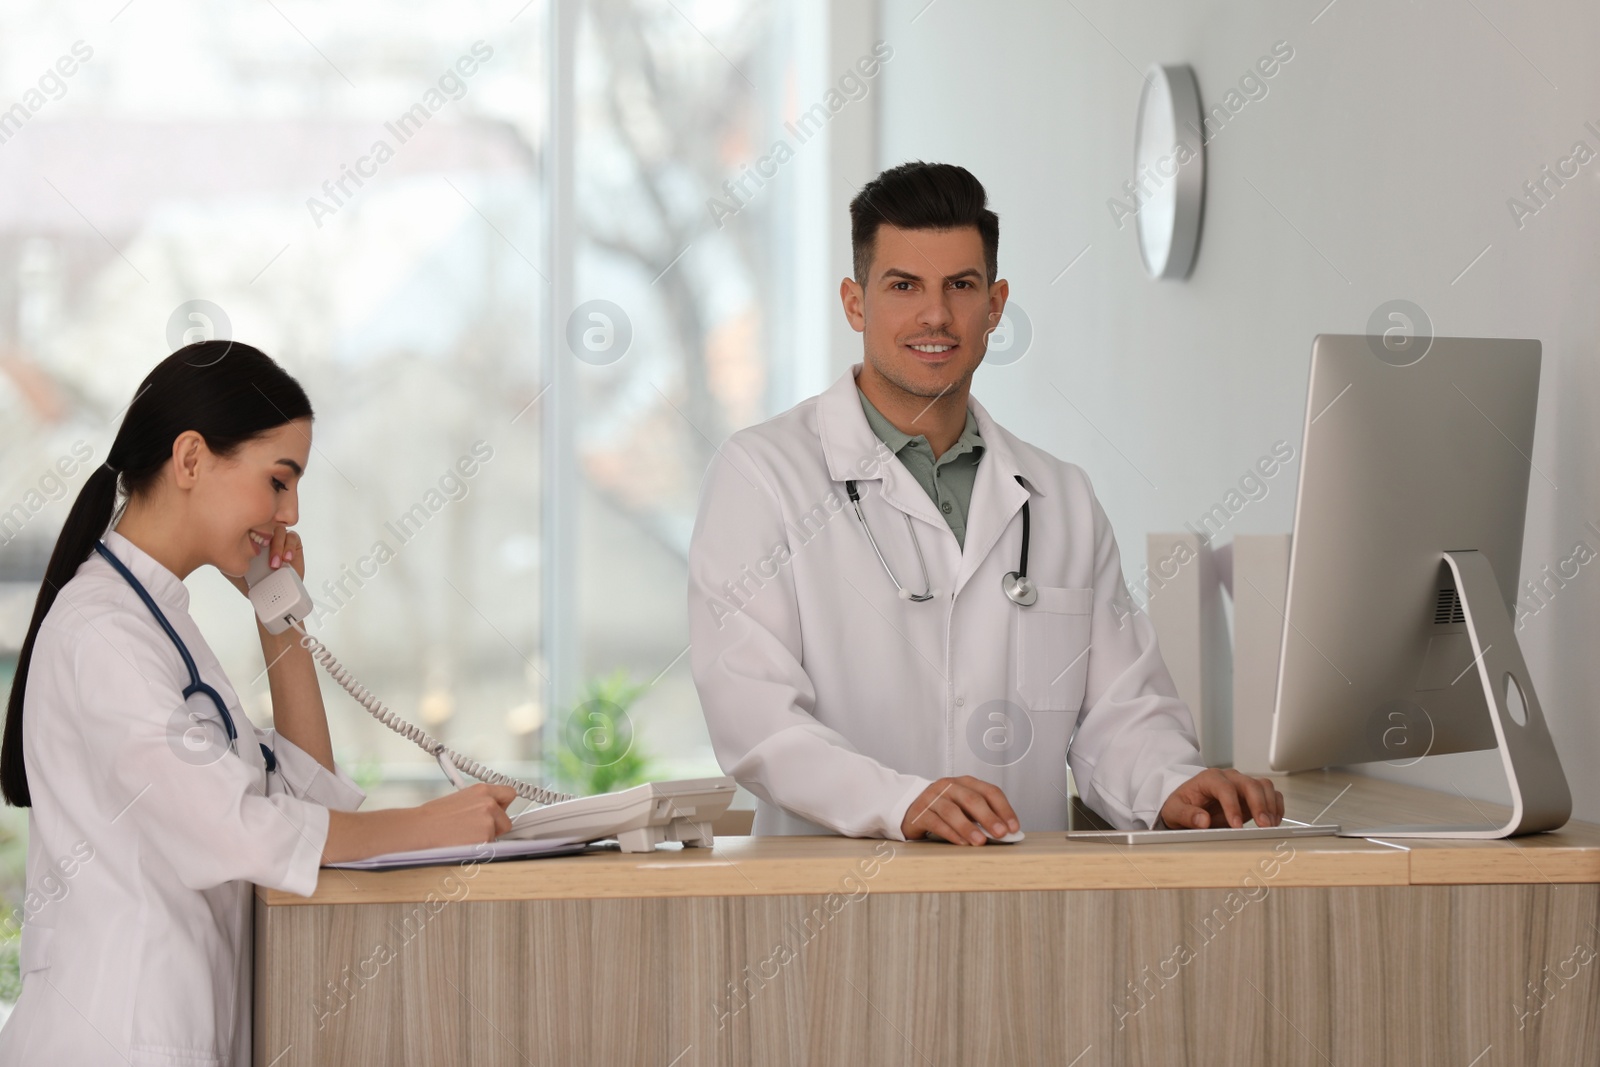 Photo of Receptionist and doctor working at countertop in hospital